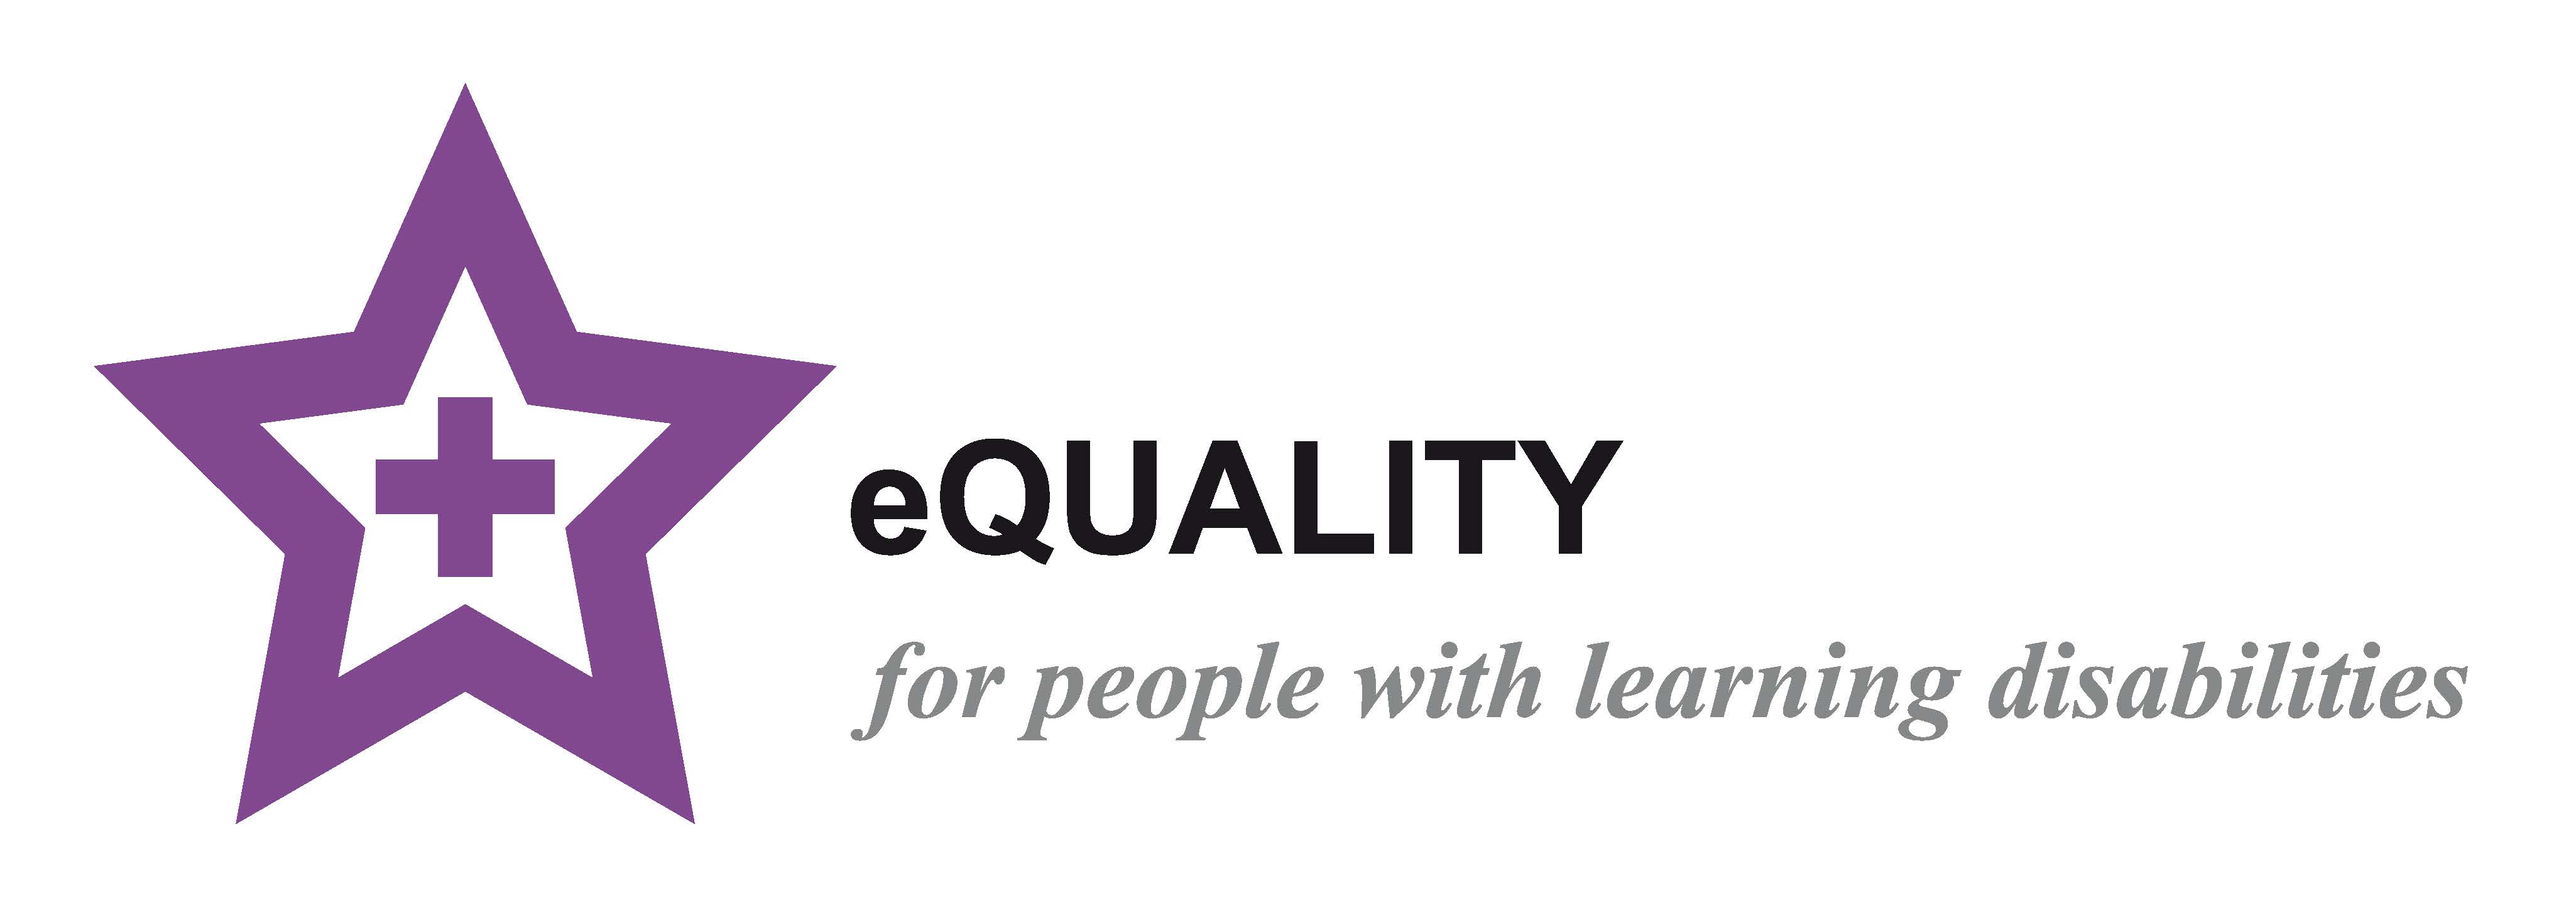 equality for people with learning disabilities